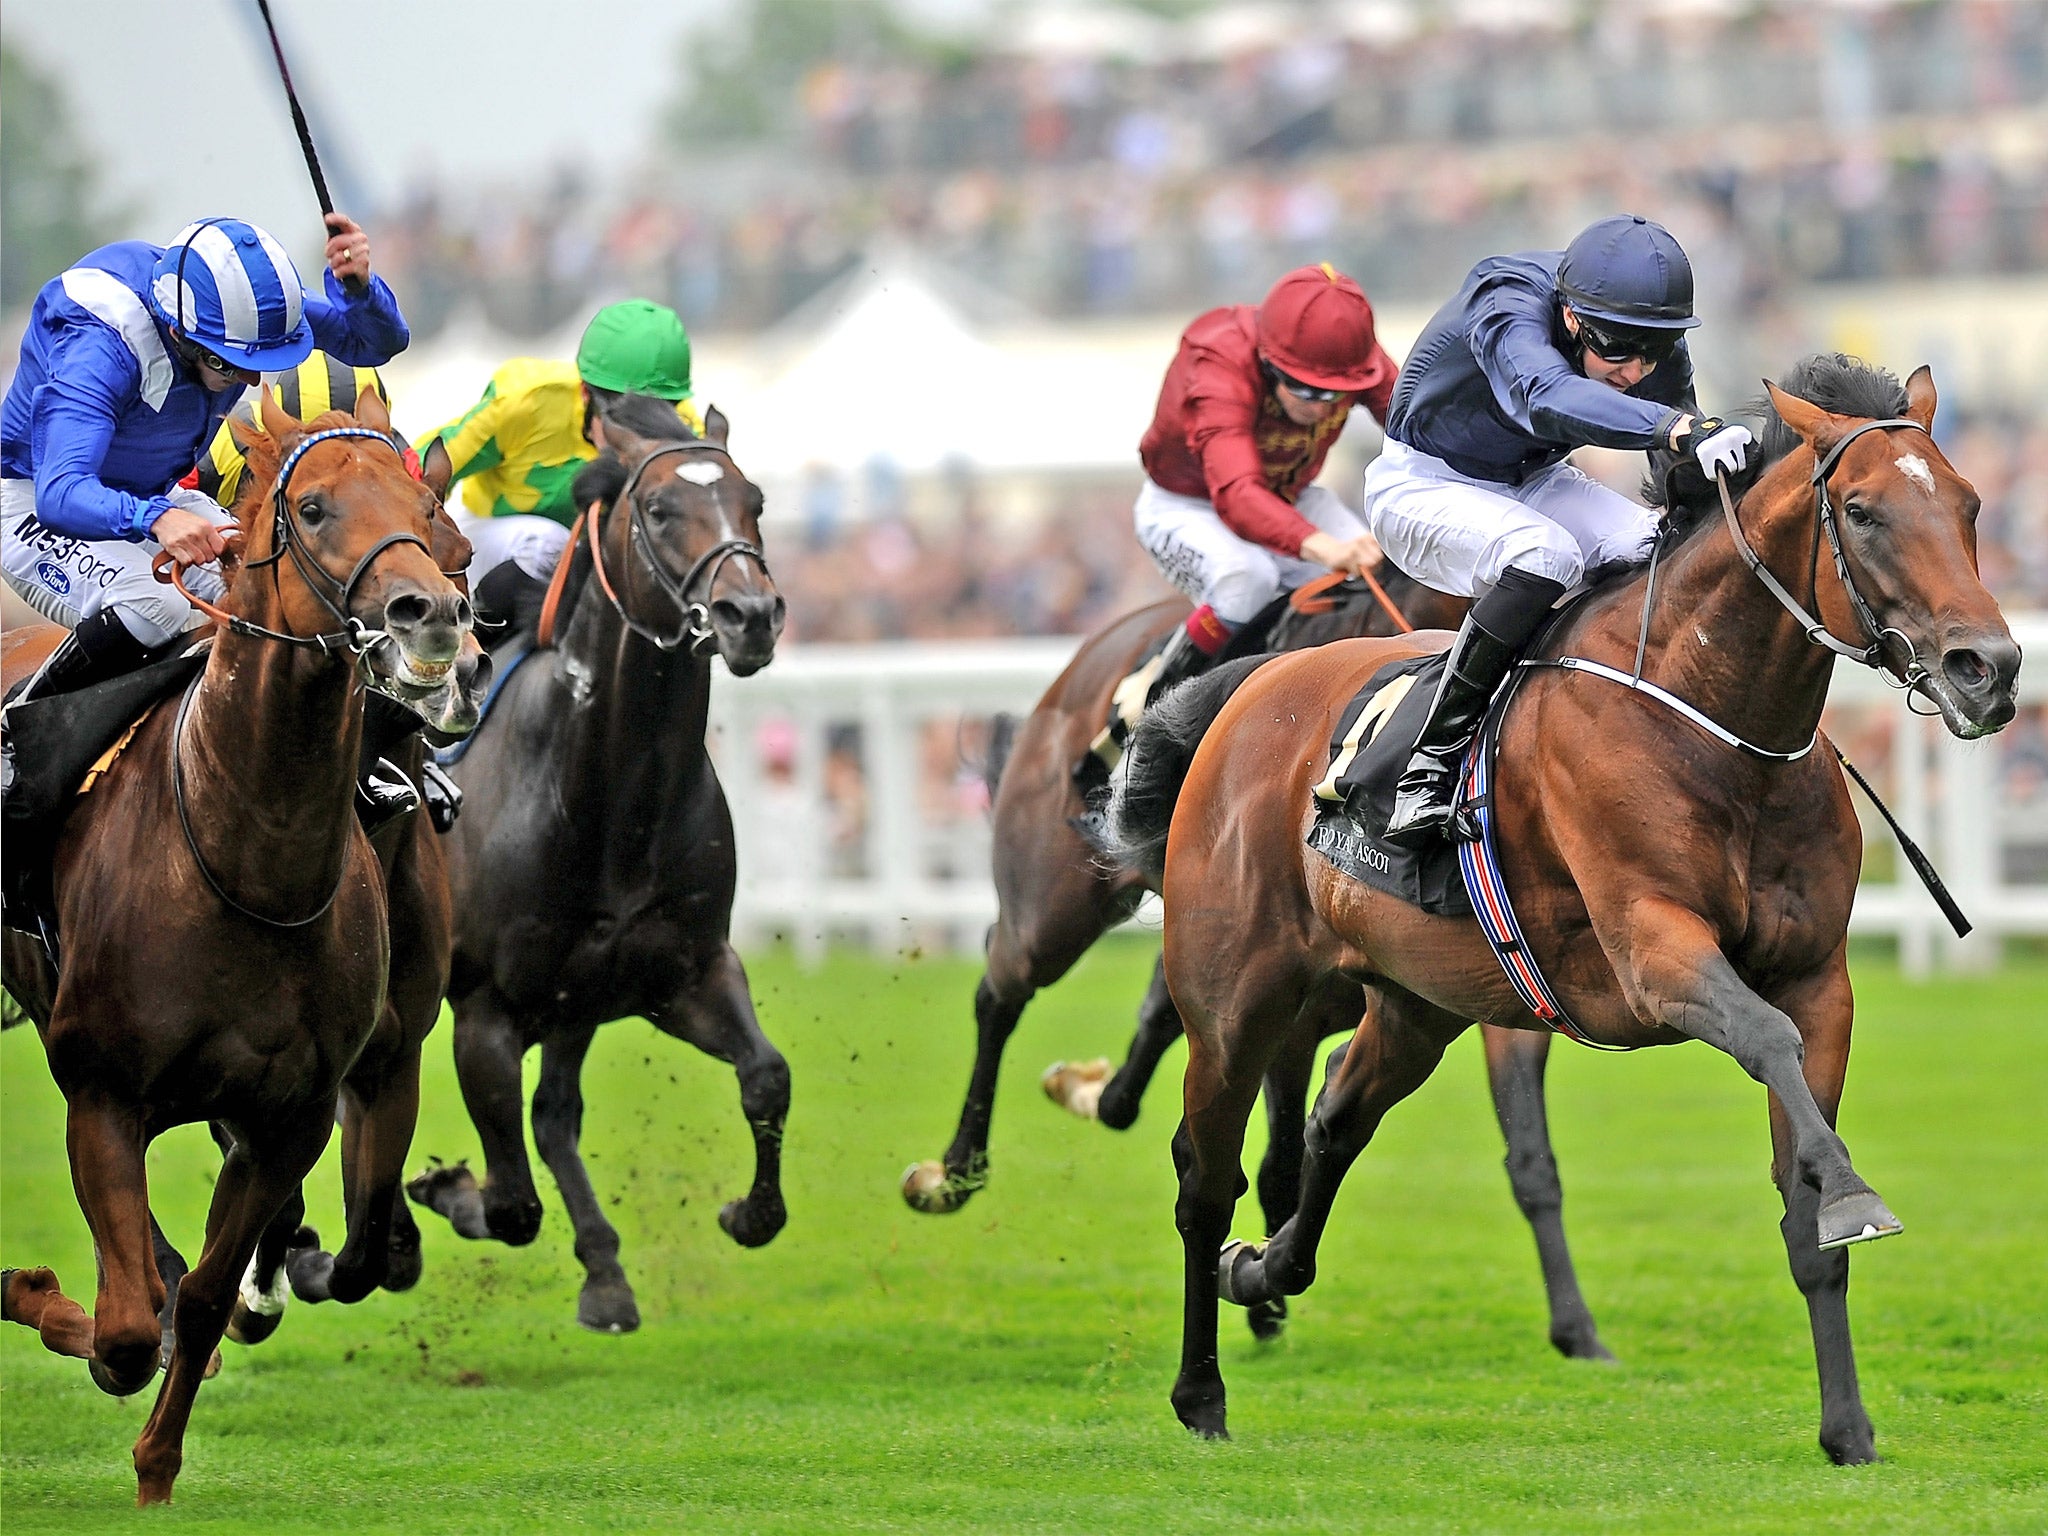 Declaration Of War stormed home to win Ascot’s Queen Anne Stakes